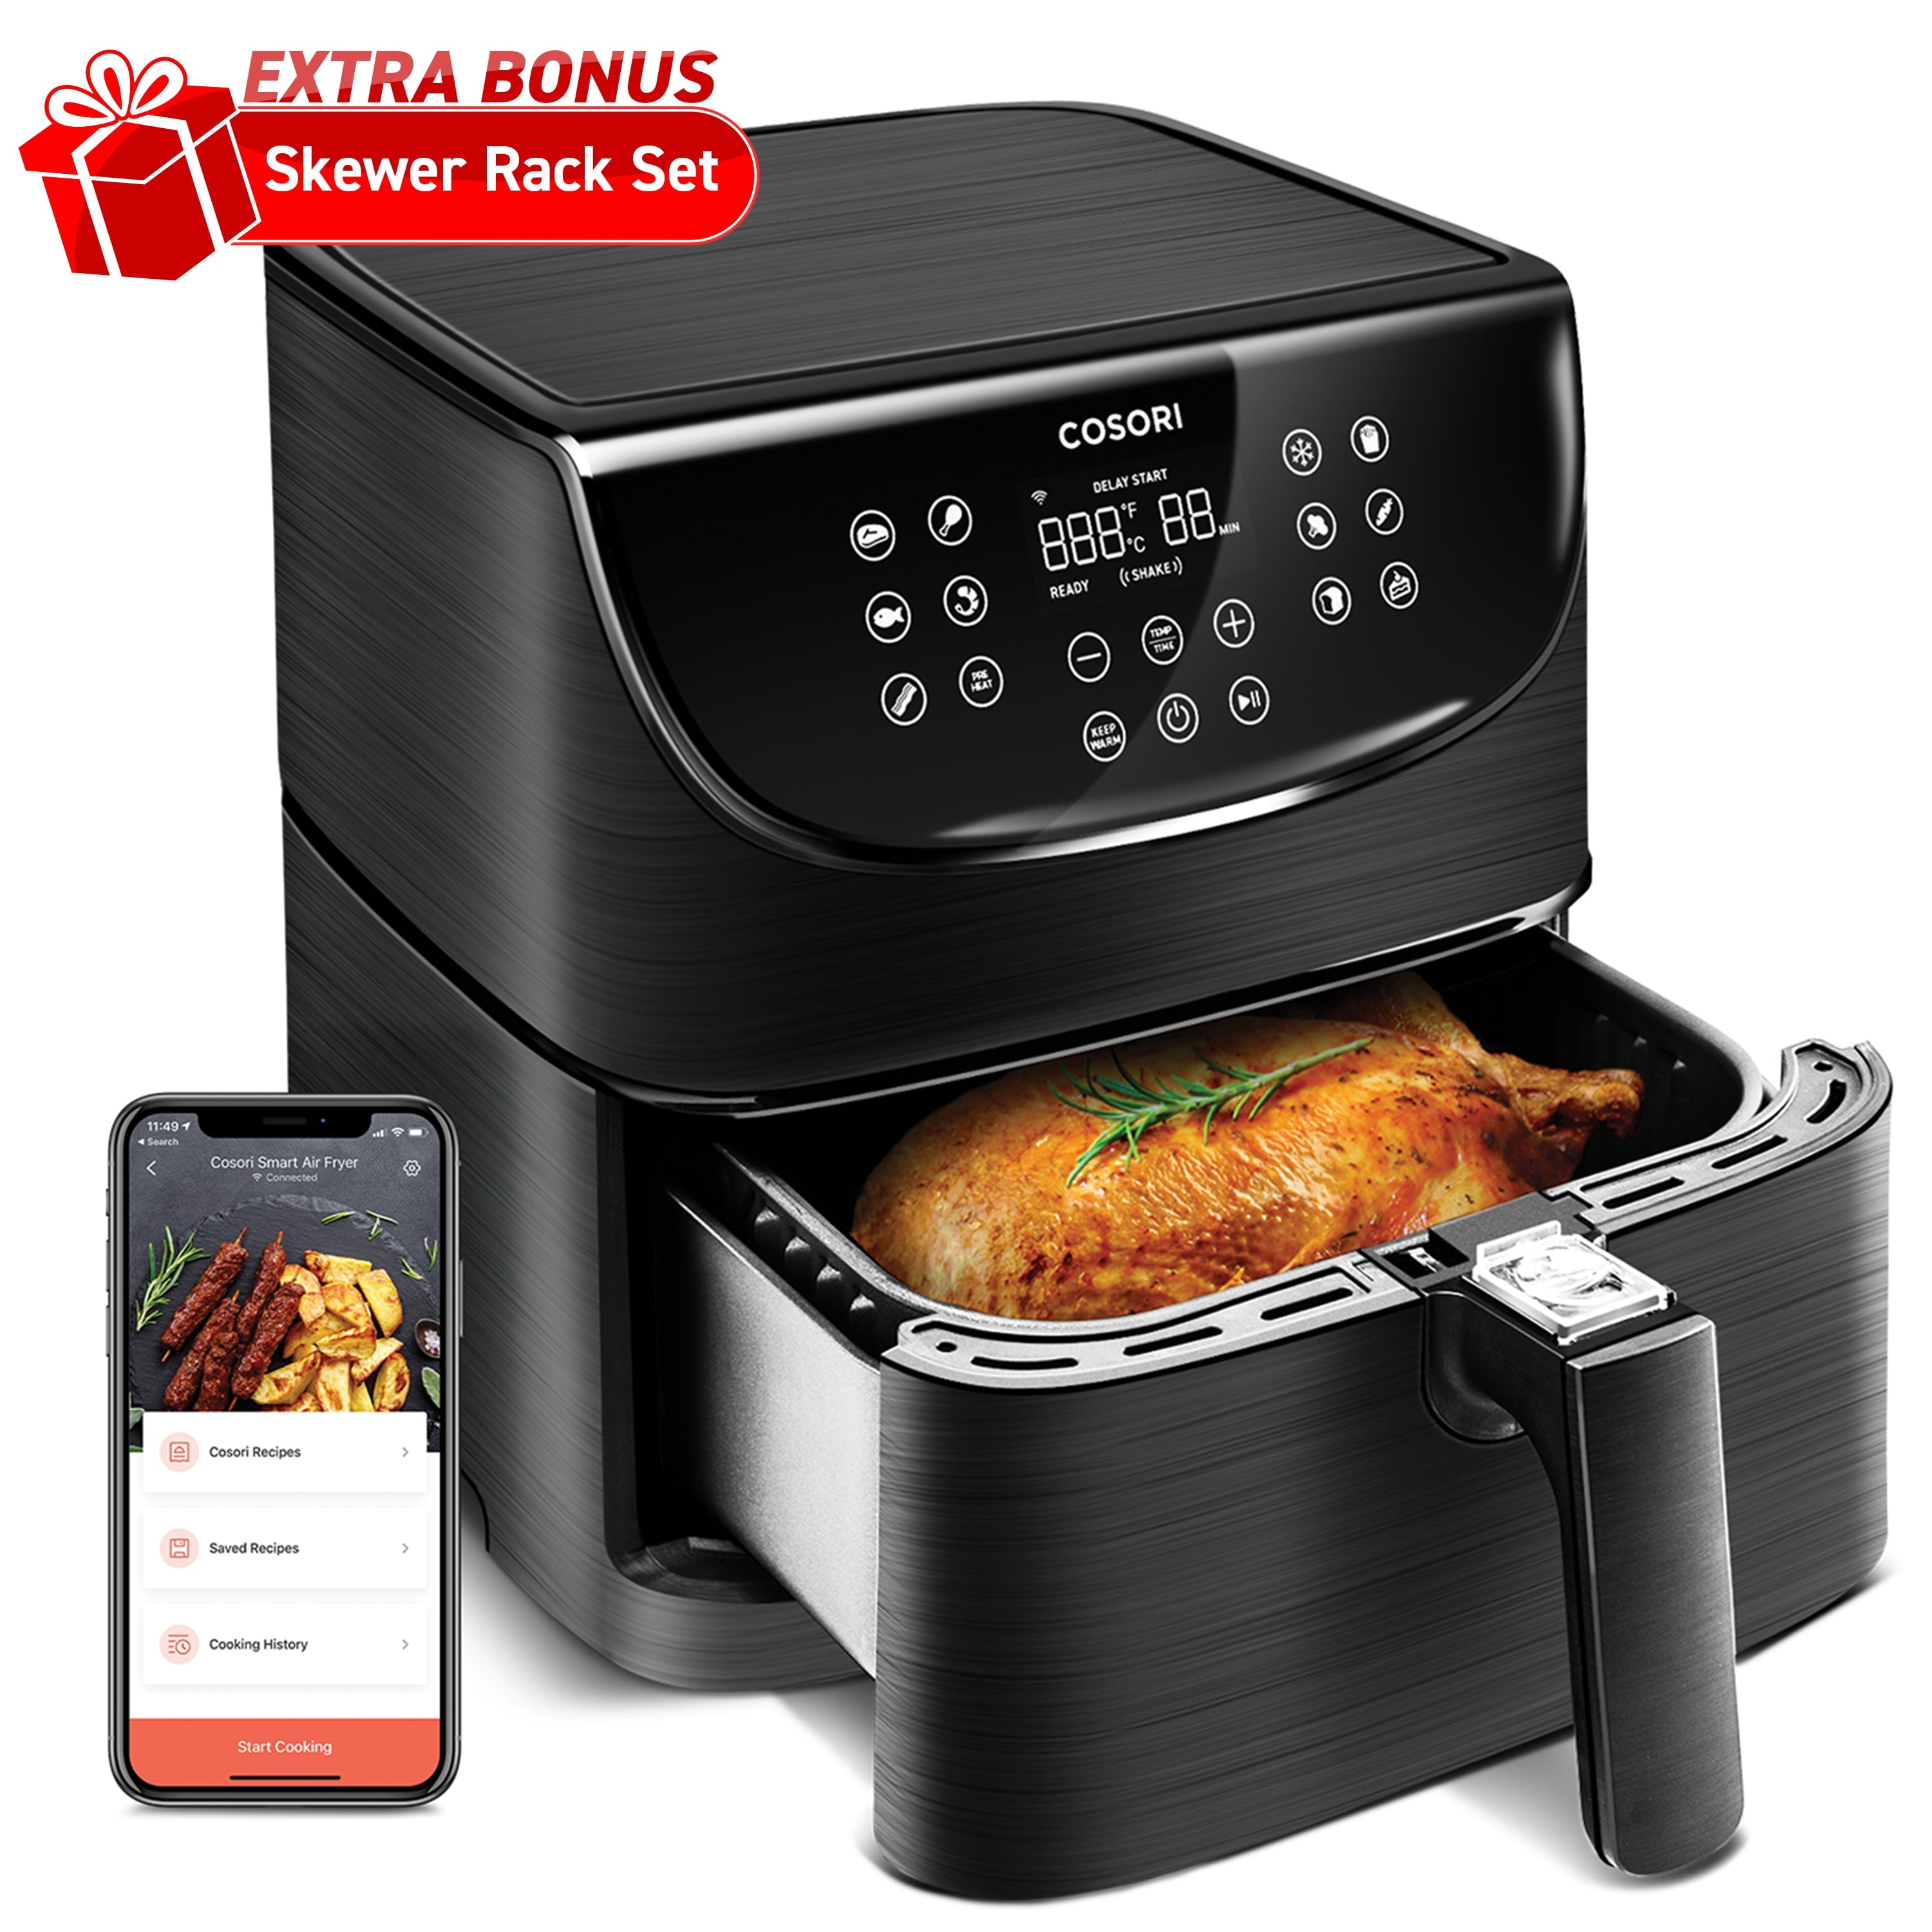 https://ak1.ostkcdn.com/images/products/is/images/direct/5931b5ce0830b2d424842b646a48cdfc165b6578/Smart-Air-Fryer%2C-5.8-QT-Pro-Gen-2-XL-Large-13-in-1-Oven%2C-Voice-Control.jpg